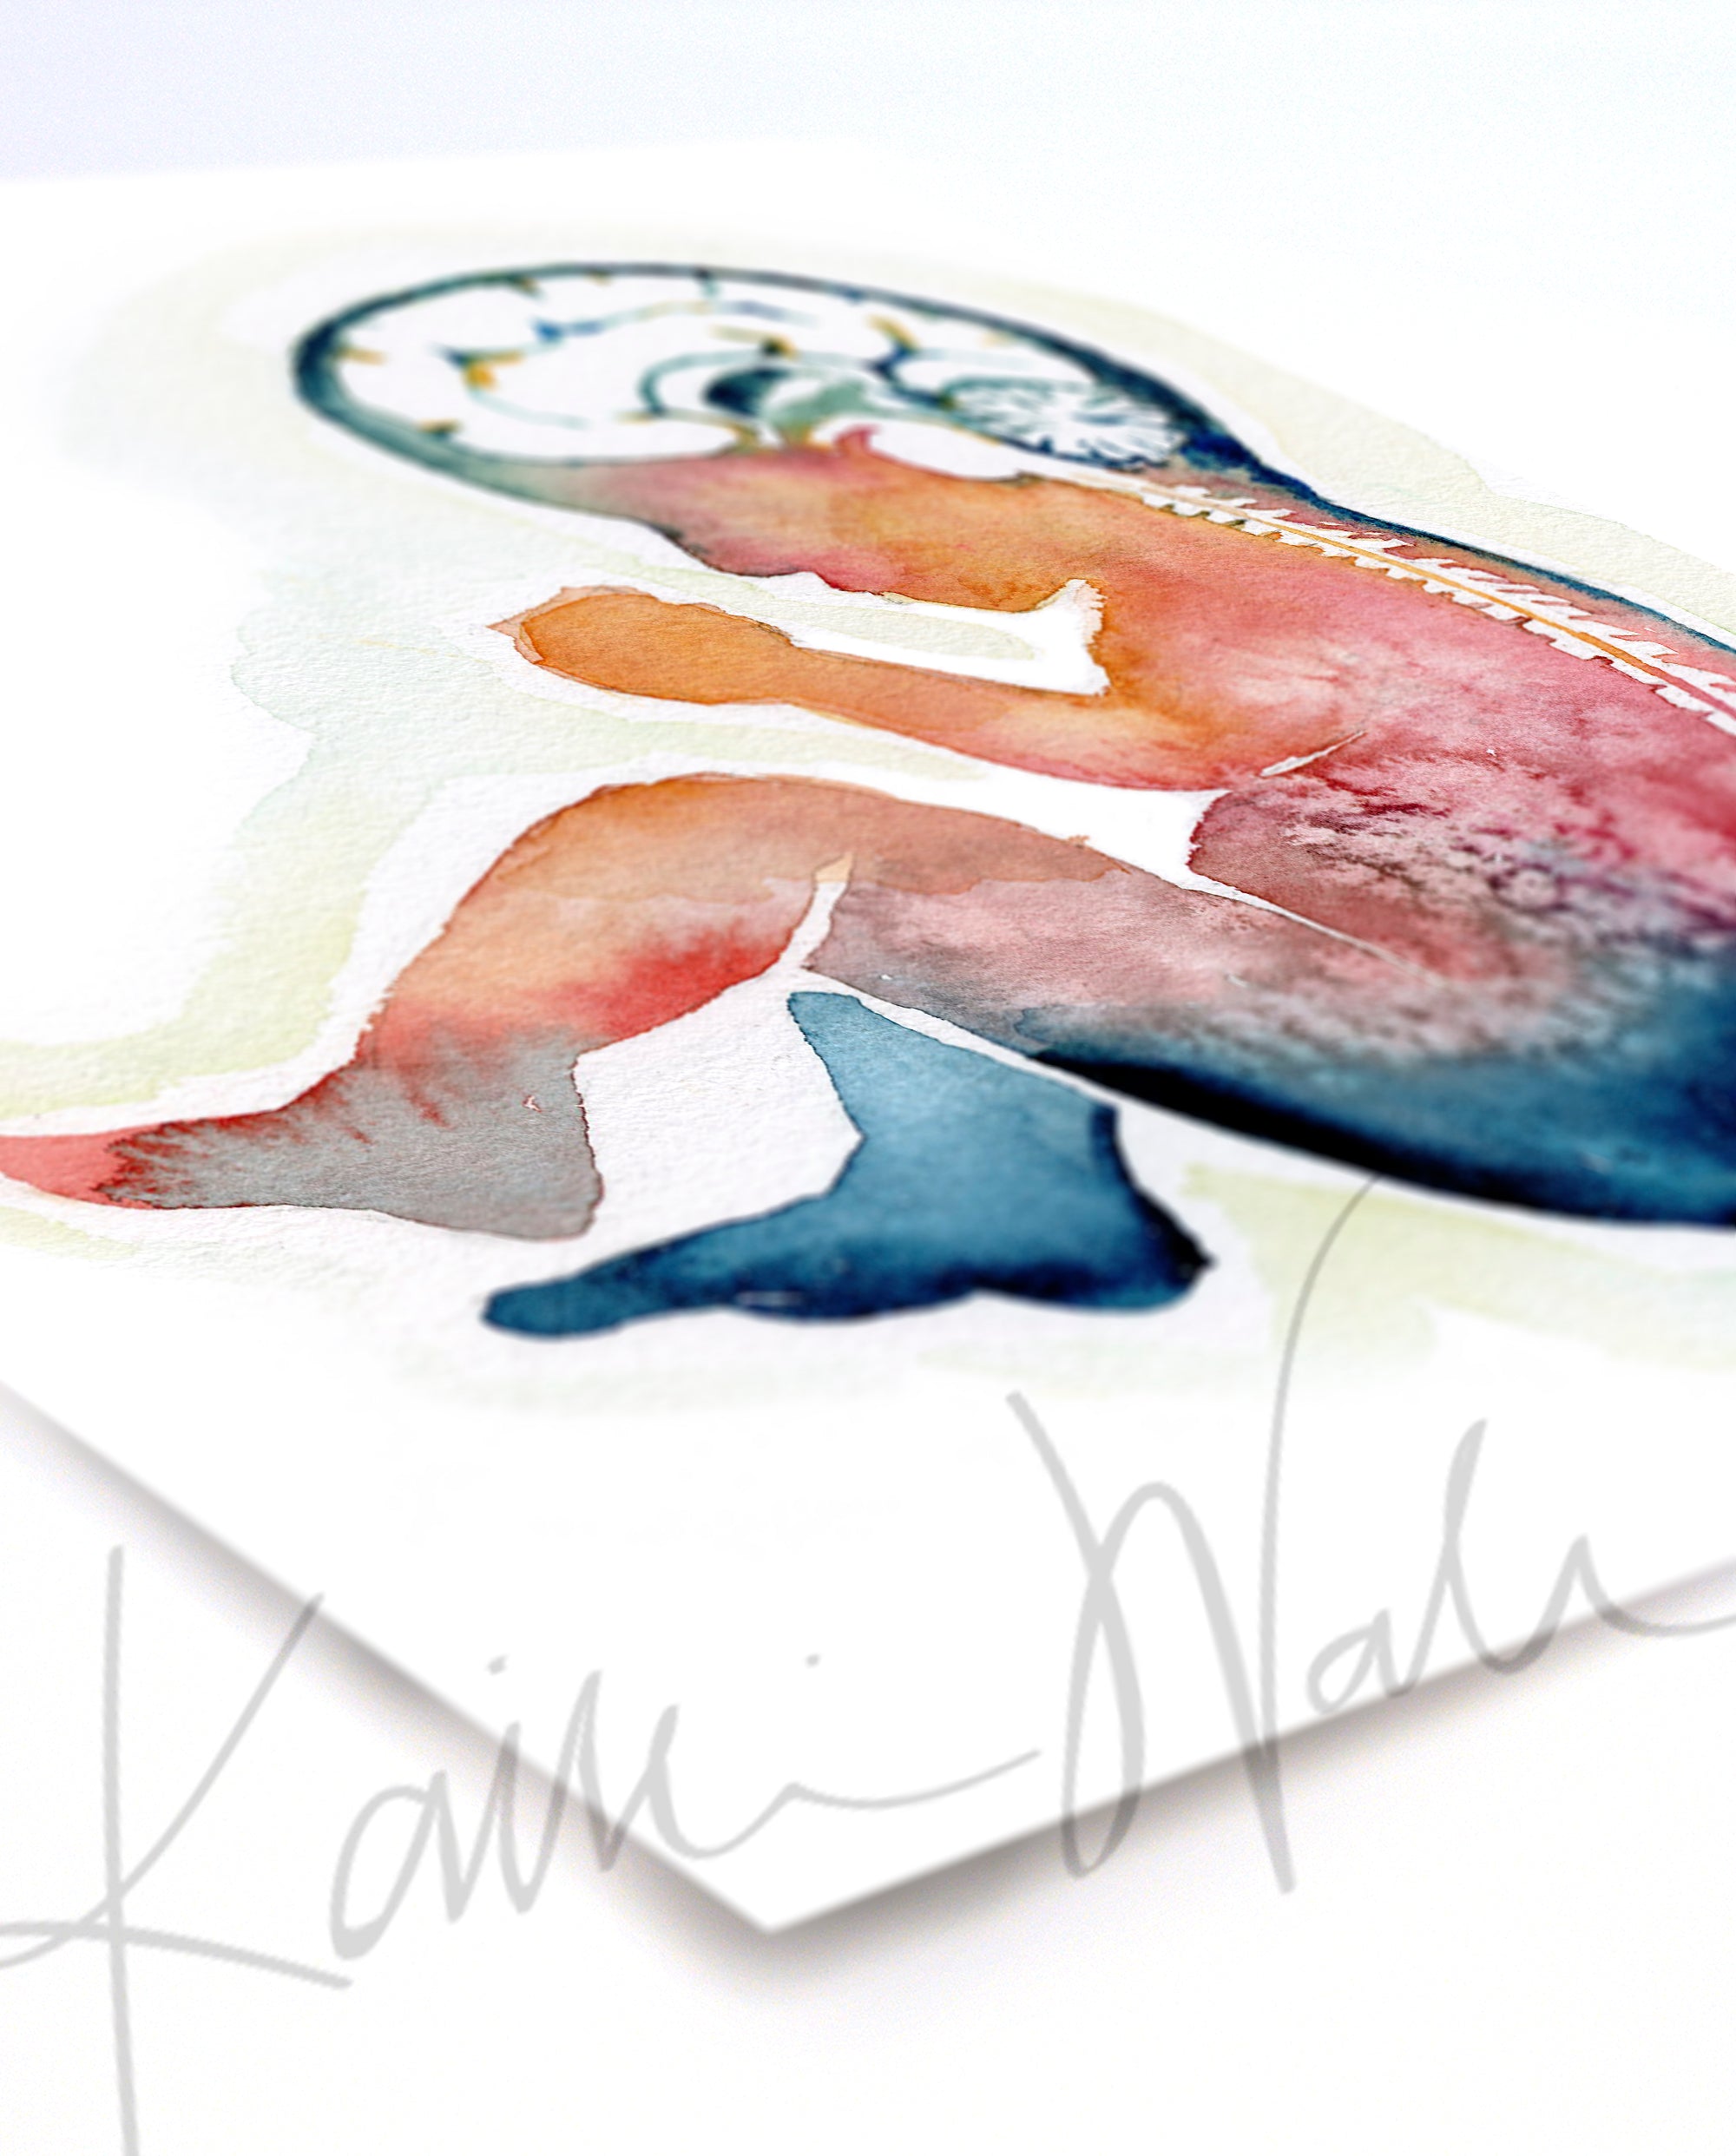 Unframed watercolor painting of a fetus showing the spine and brain in rainbow colors. The print is at an angle.